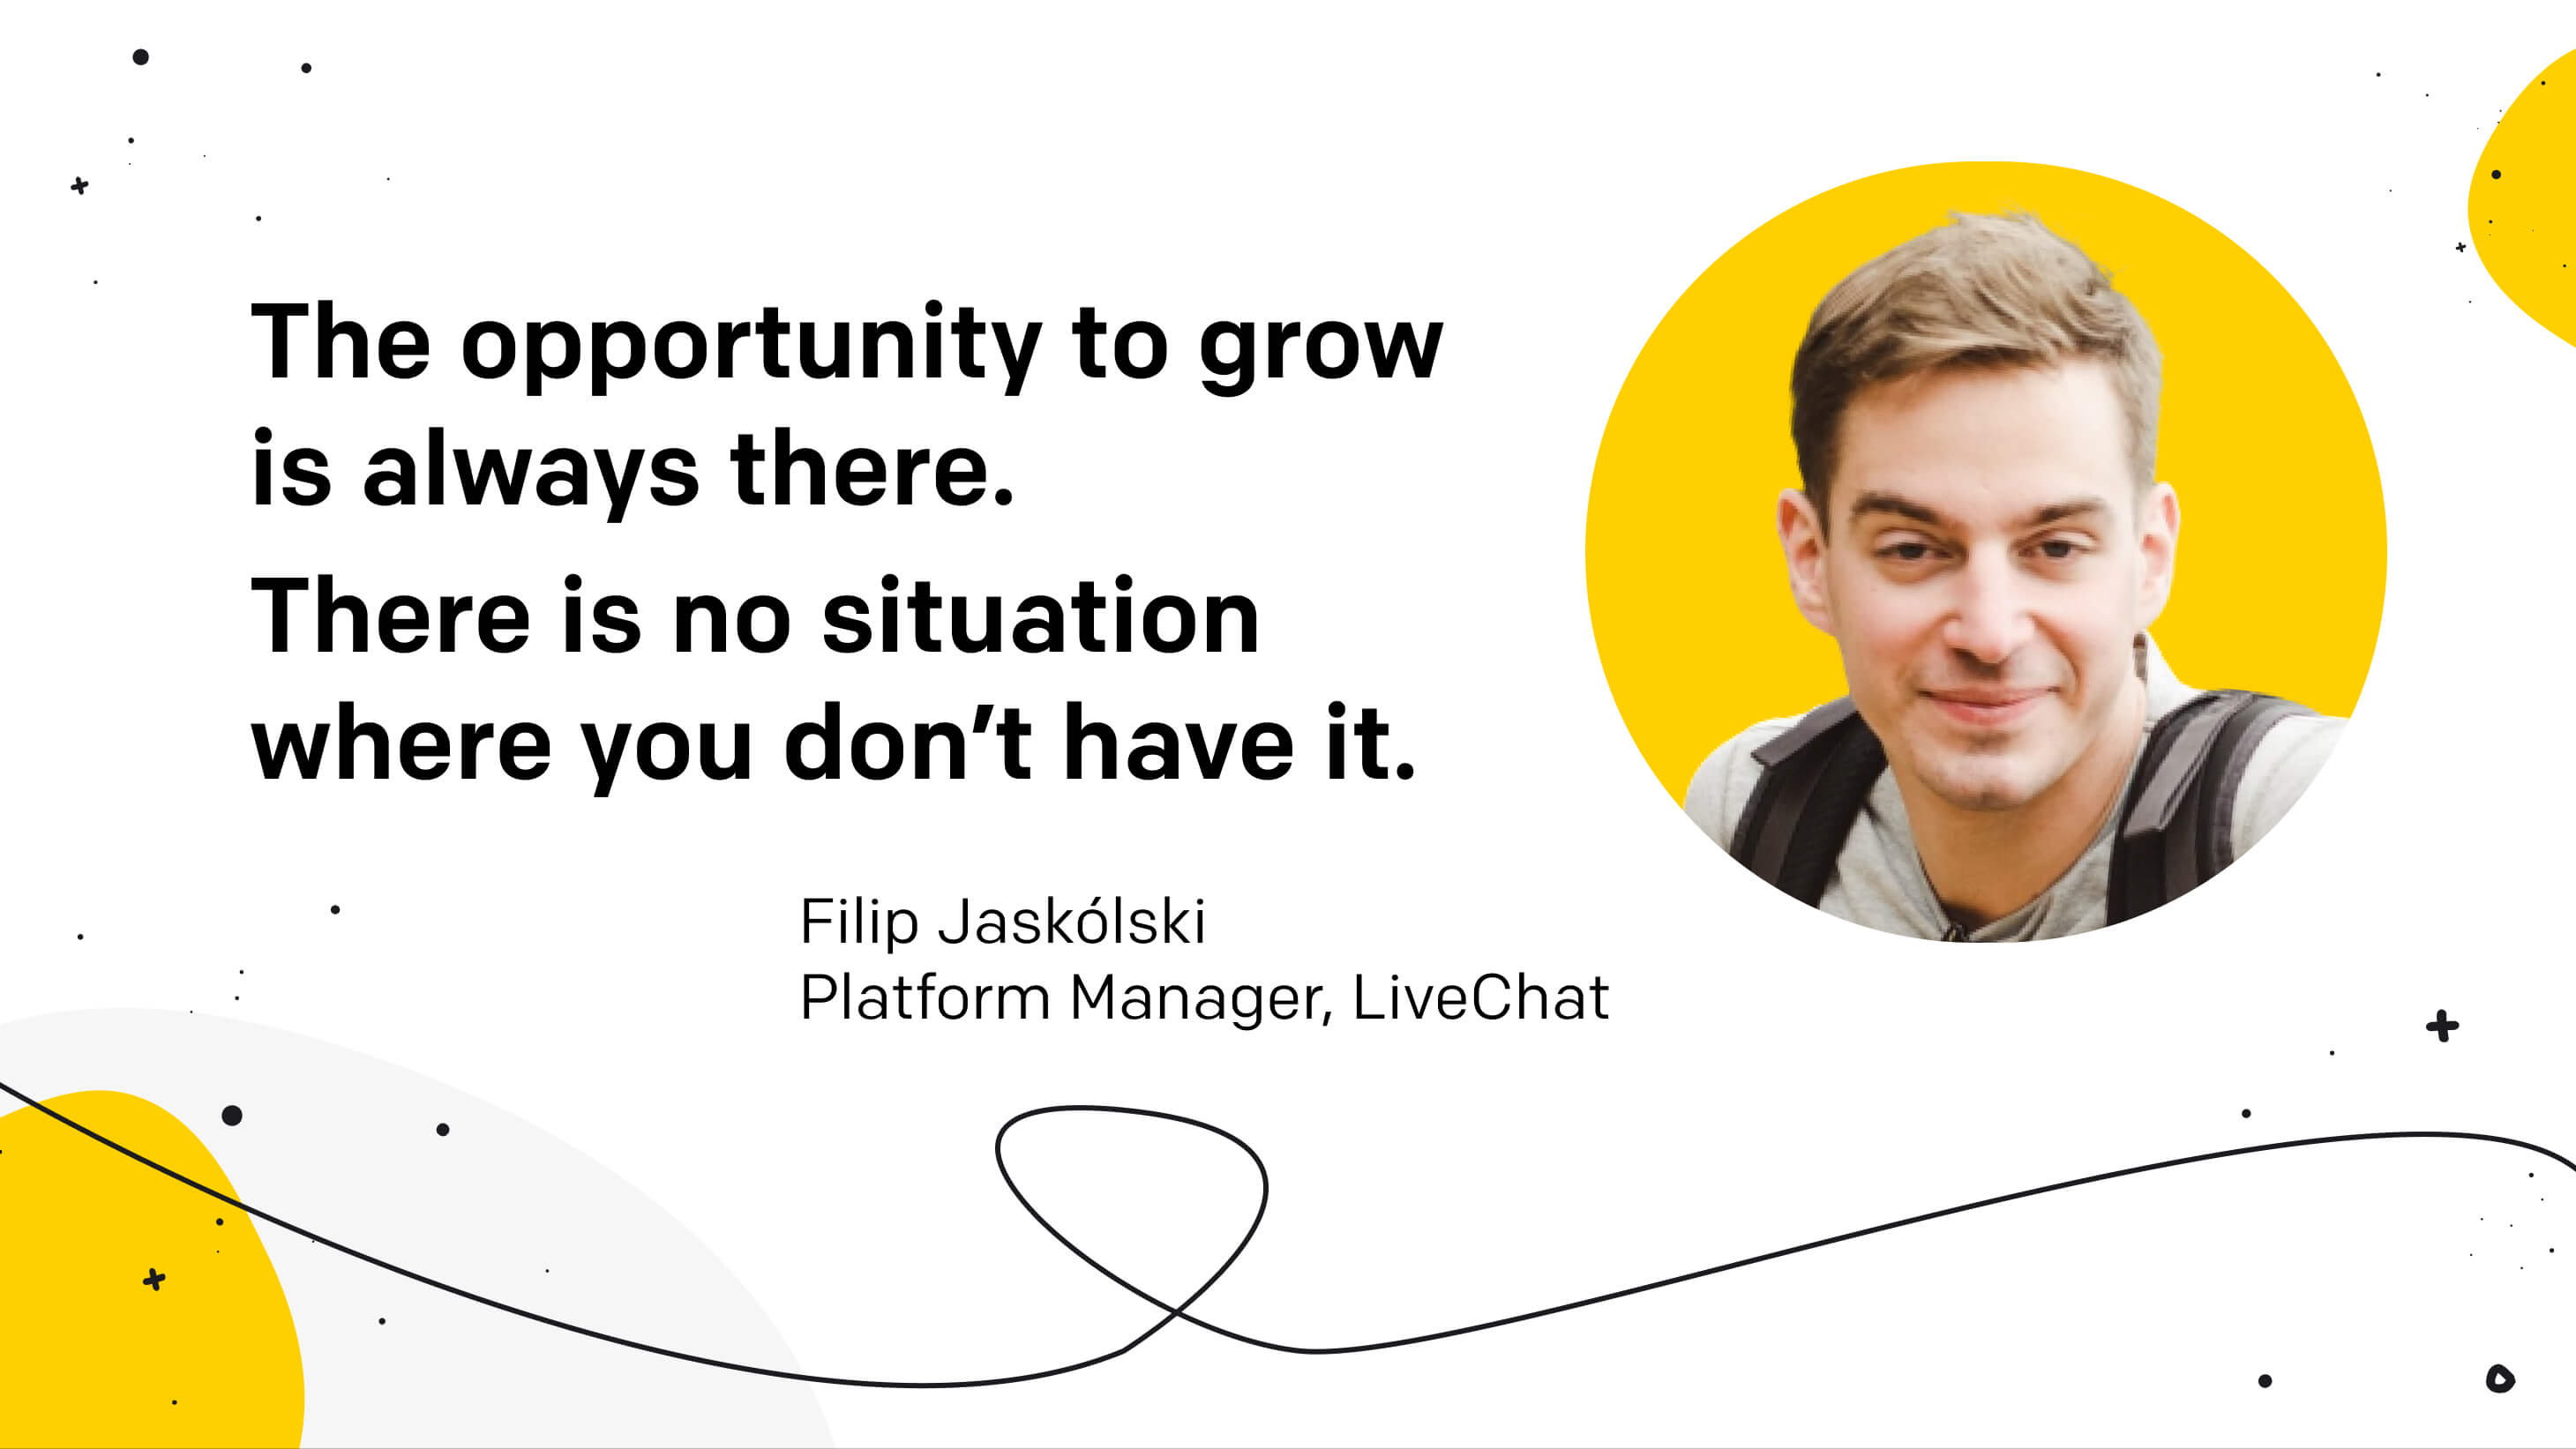 LiveChat quote from Filip